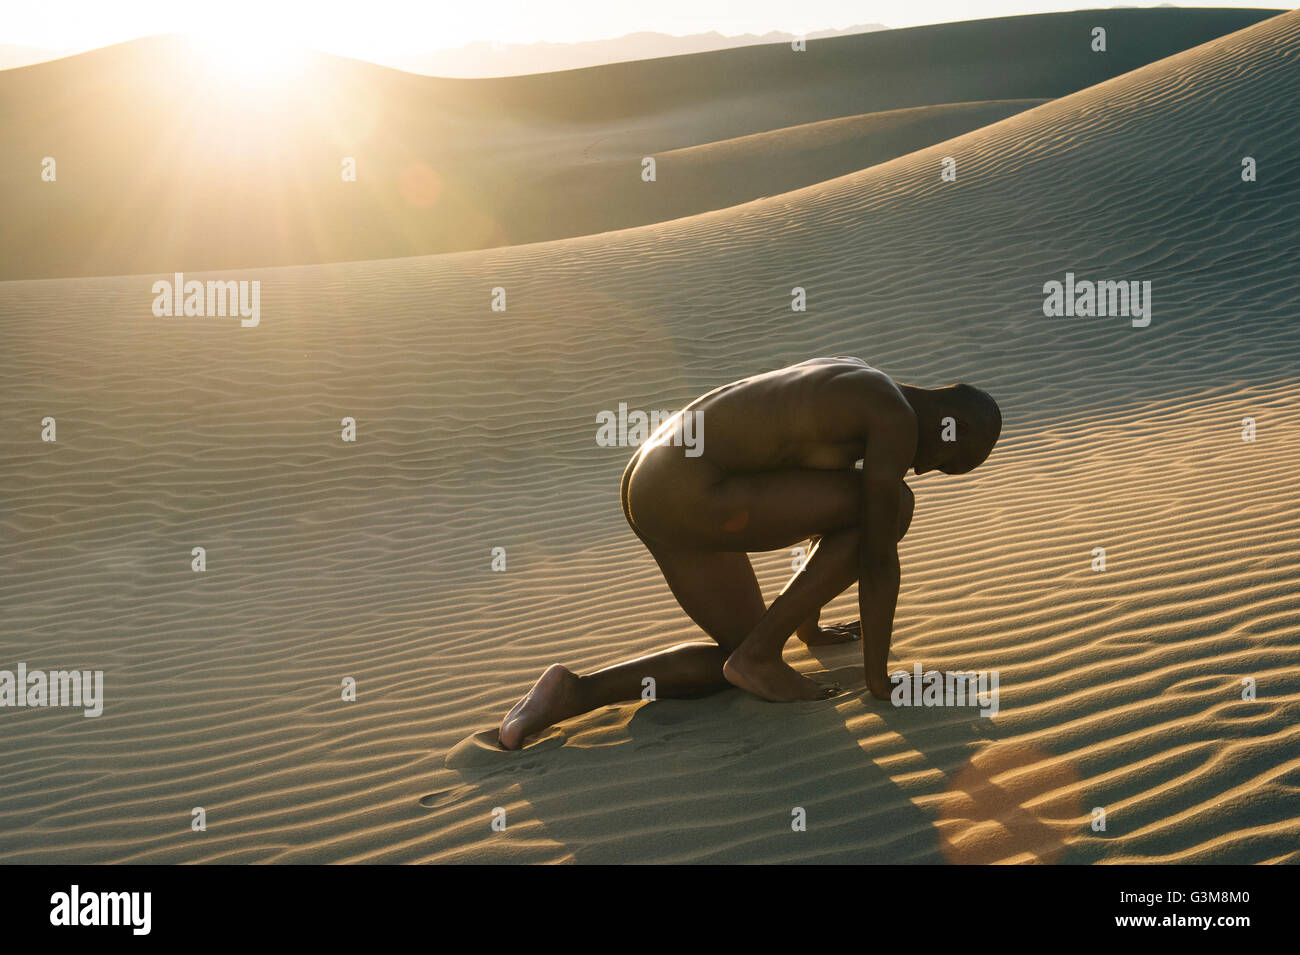 Nude woman crouched in the desert Stock Photo